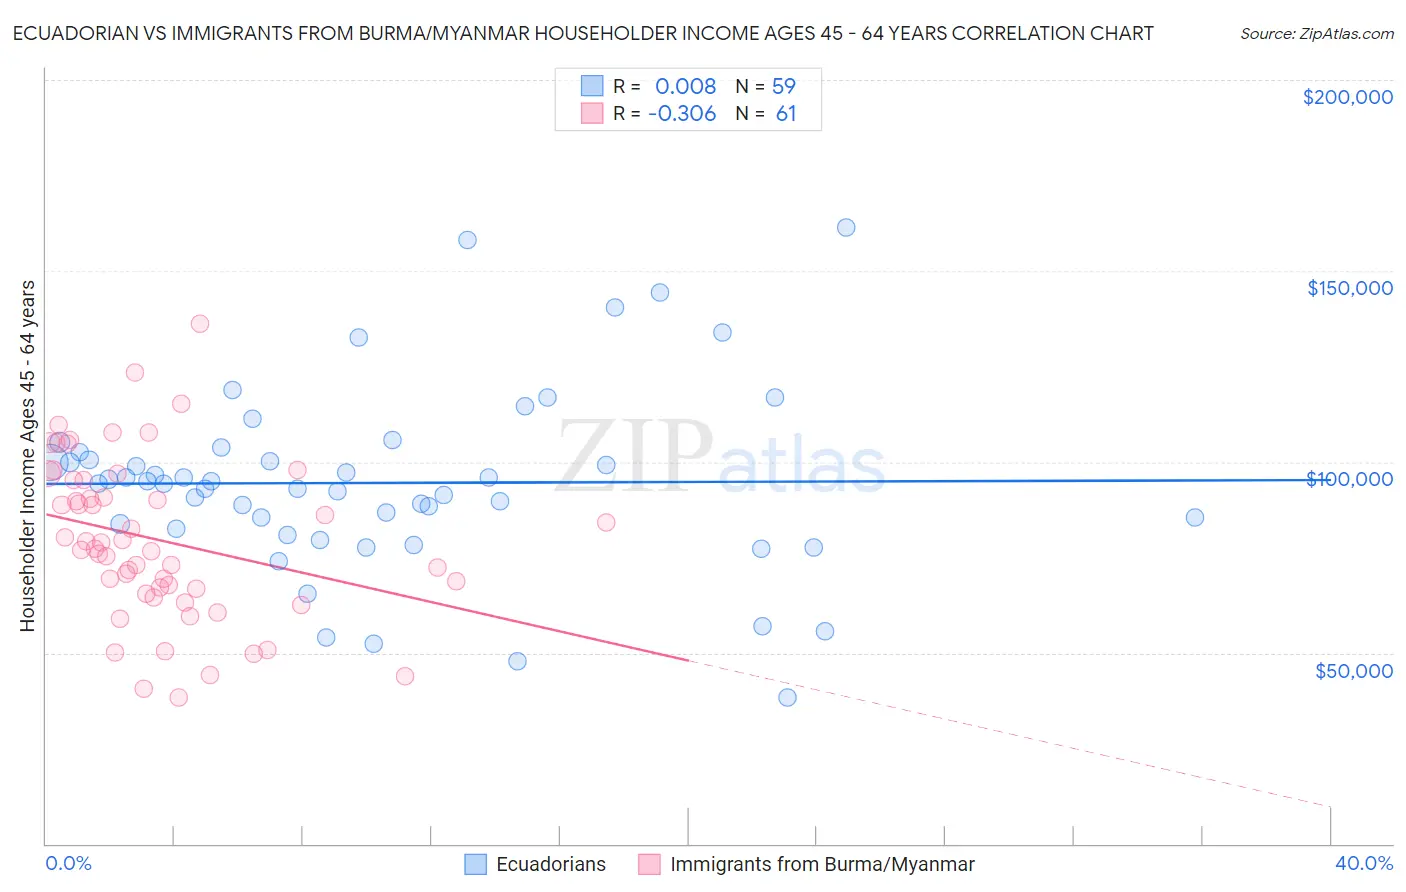 Ecuadorian vs Immigrants from Burma/Myanmar Householder Income Ages 45 - 64 years